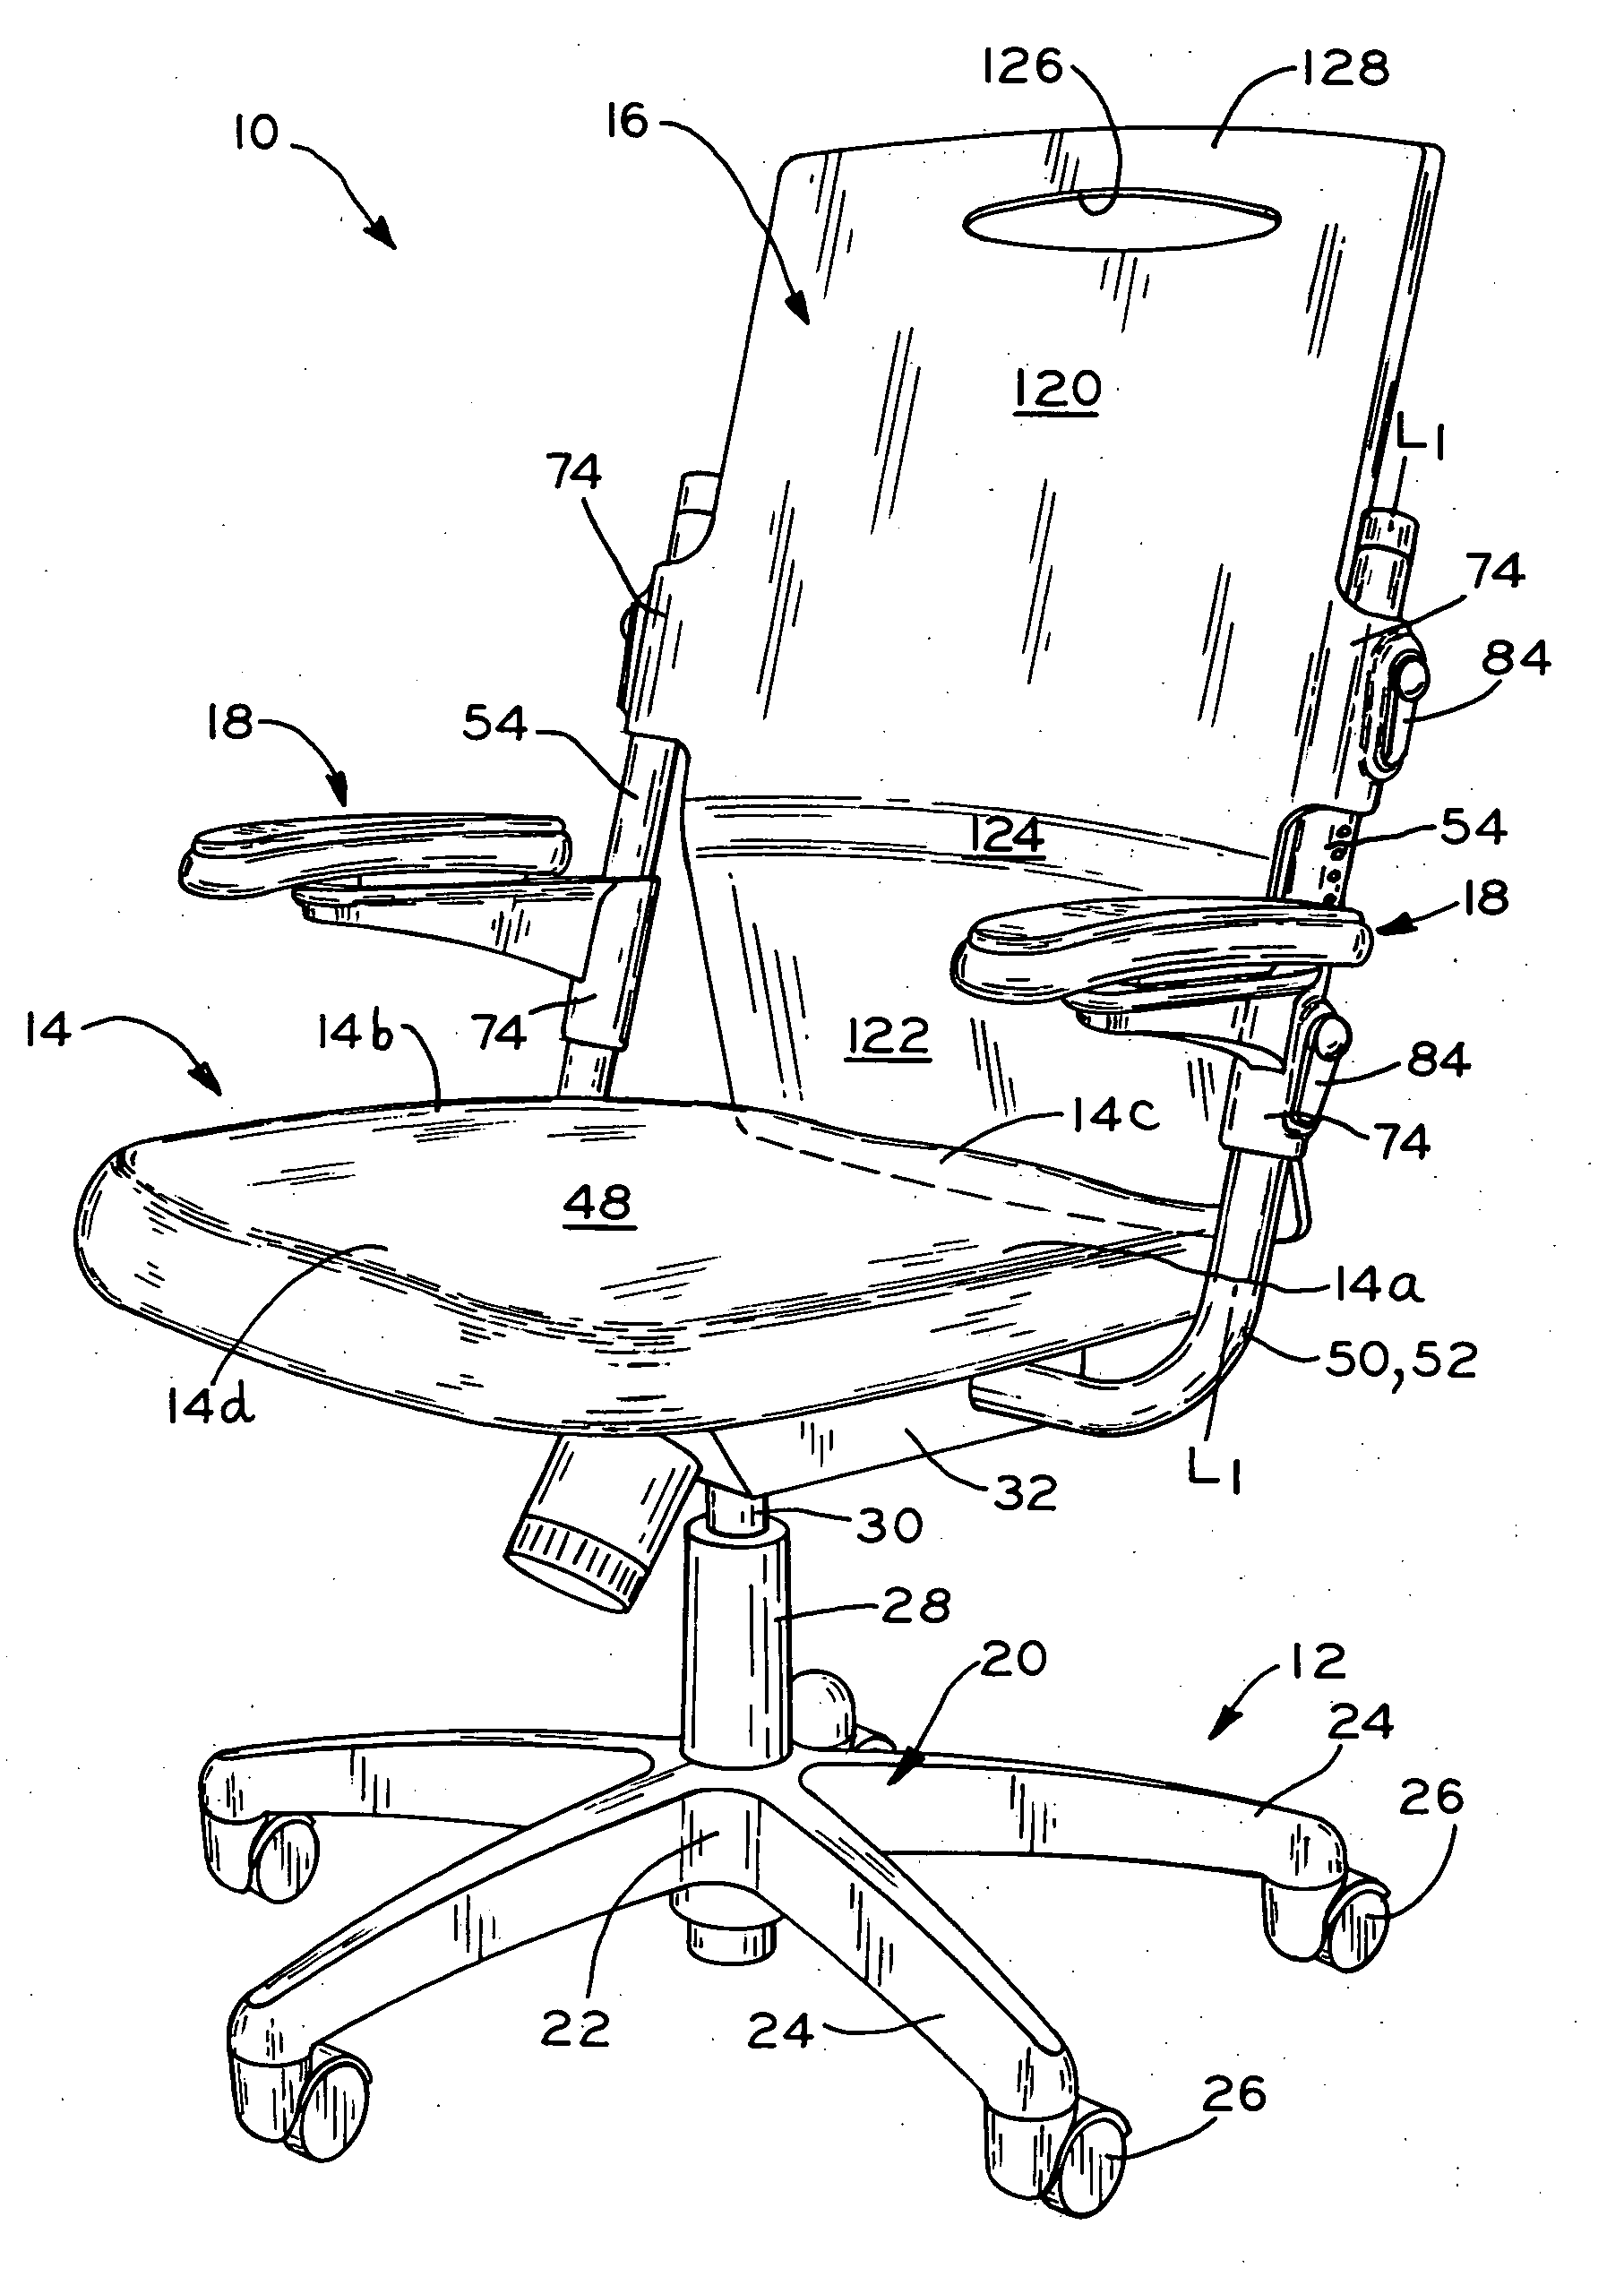 Chair with adjustable armrests and backrest